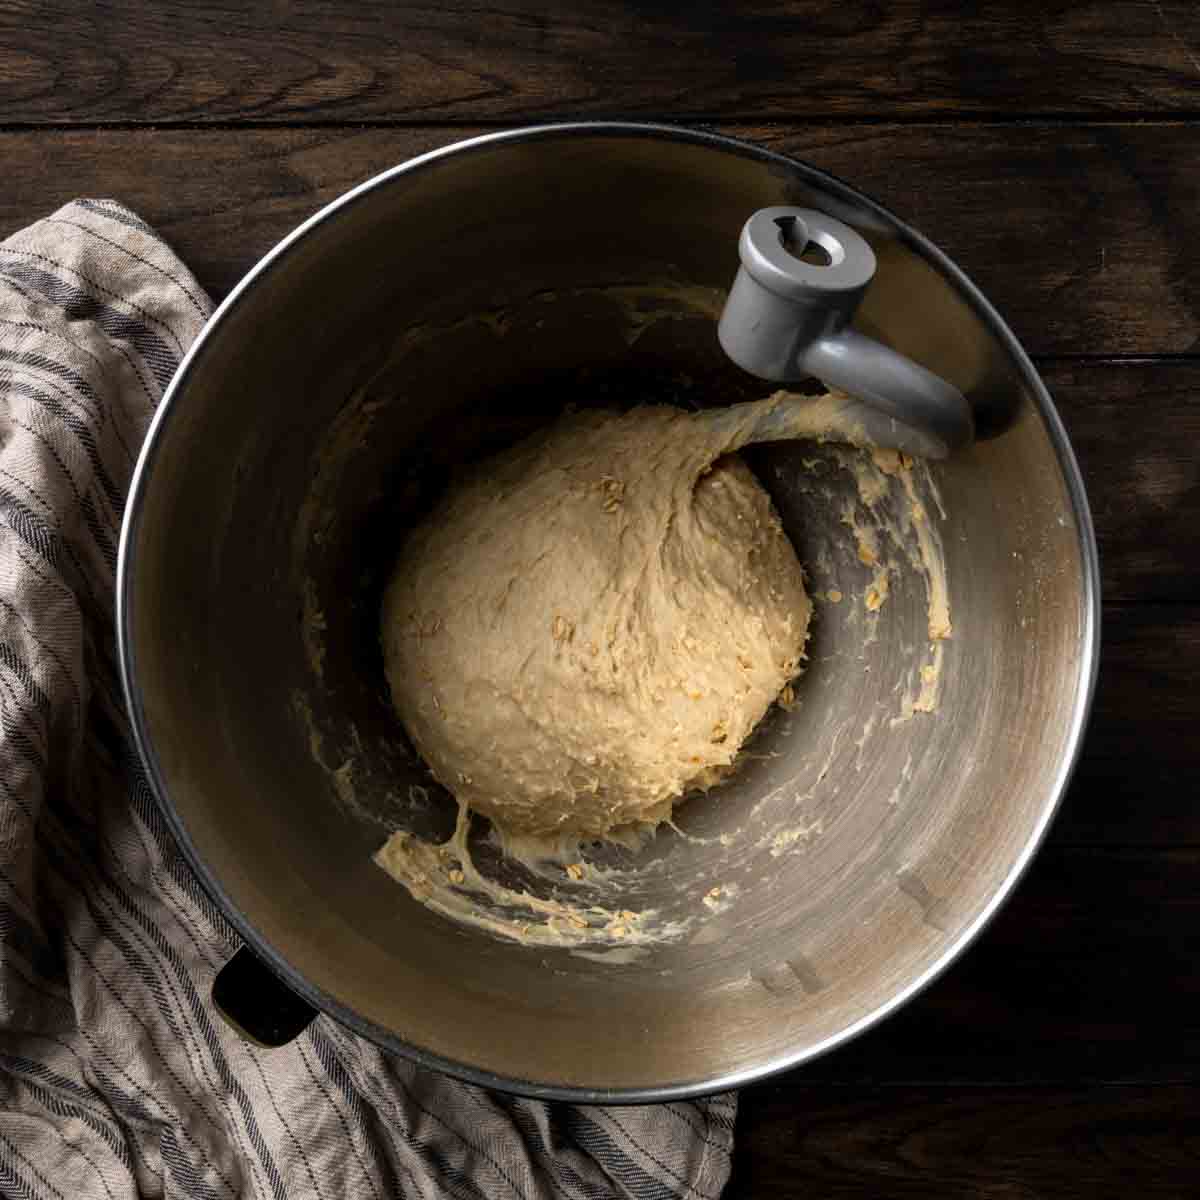 Properly kneaded dough in a mass around the dough hook